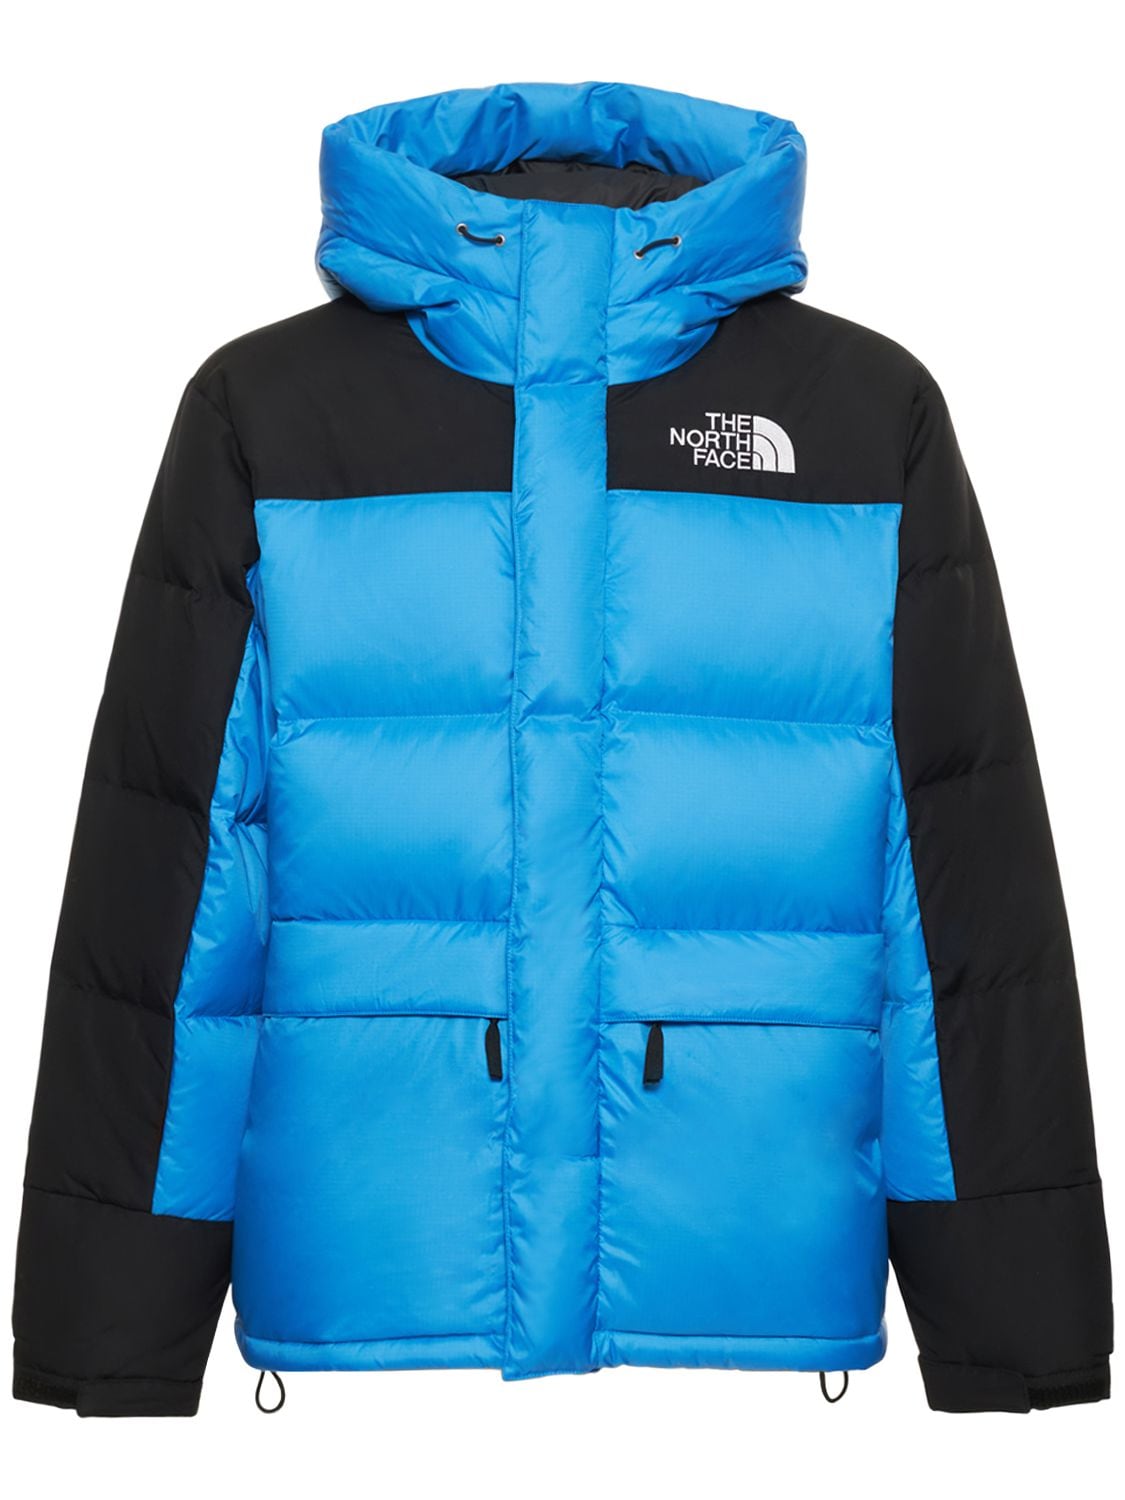 The North Face Himalayan羽绒服 In Supersonic Blue